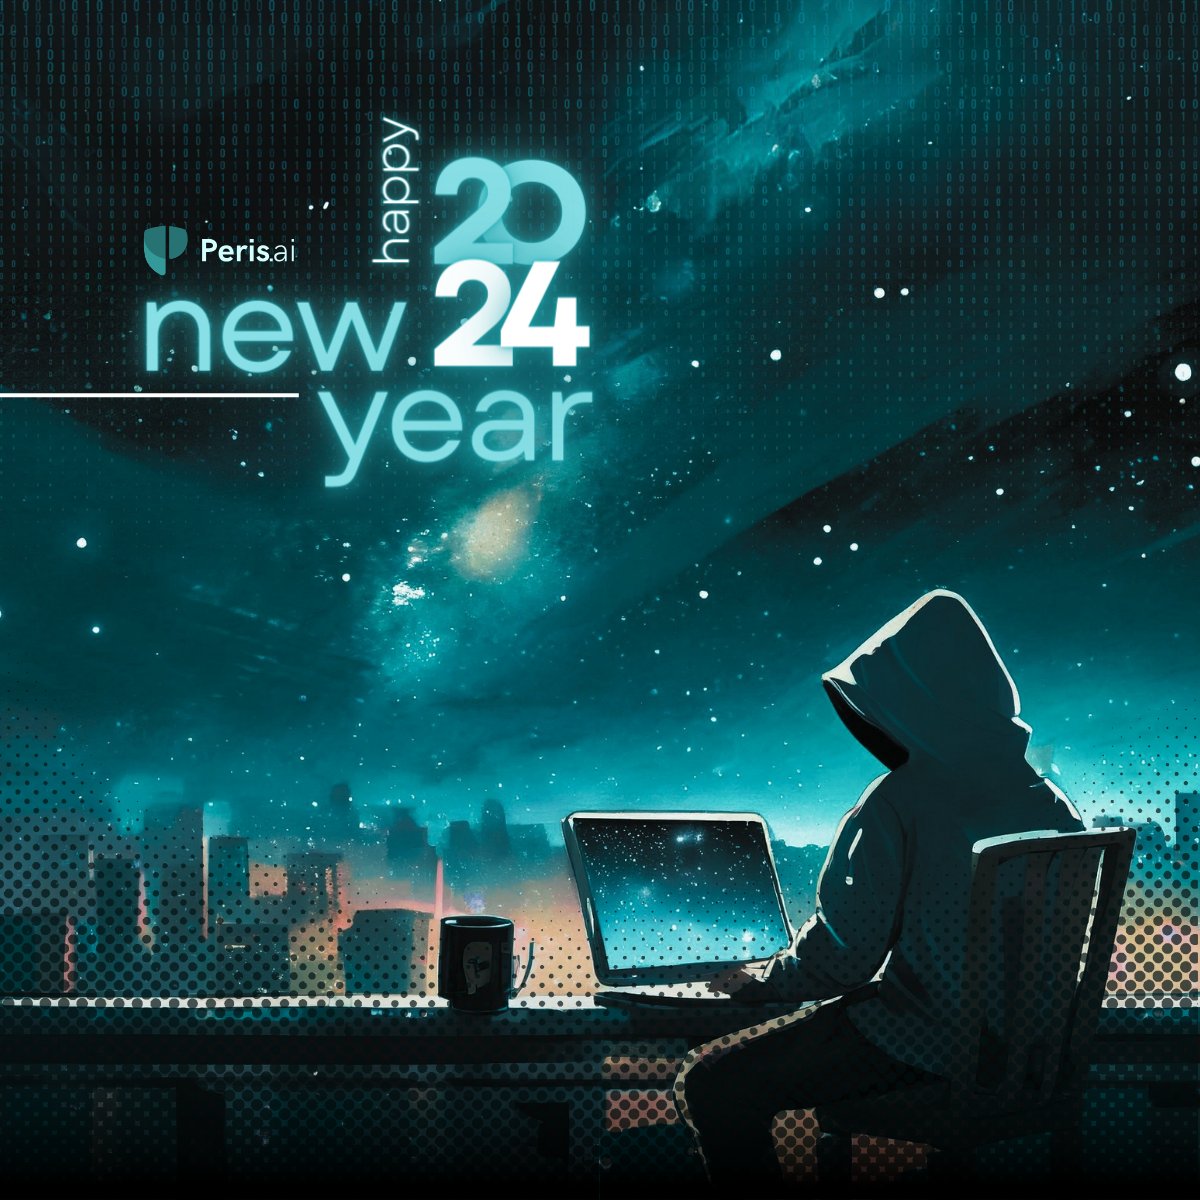 Ringing in 2024 with a Cyber-Secure Start!

🌐 From all of us at Peris.ai Cybersecurity, we wish you a Happy New Year filled with prosperity and fortified digital safety. Here's to a year of staying one step ahead of cyber threats! 

#HappyNewYear2024 #Secure2024